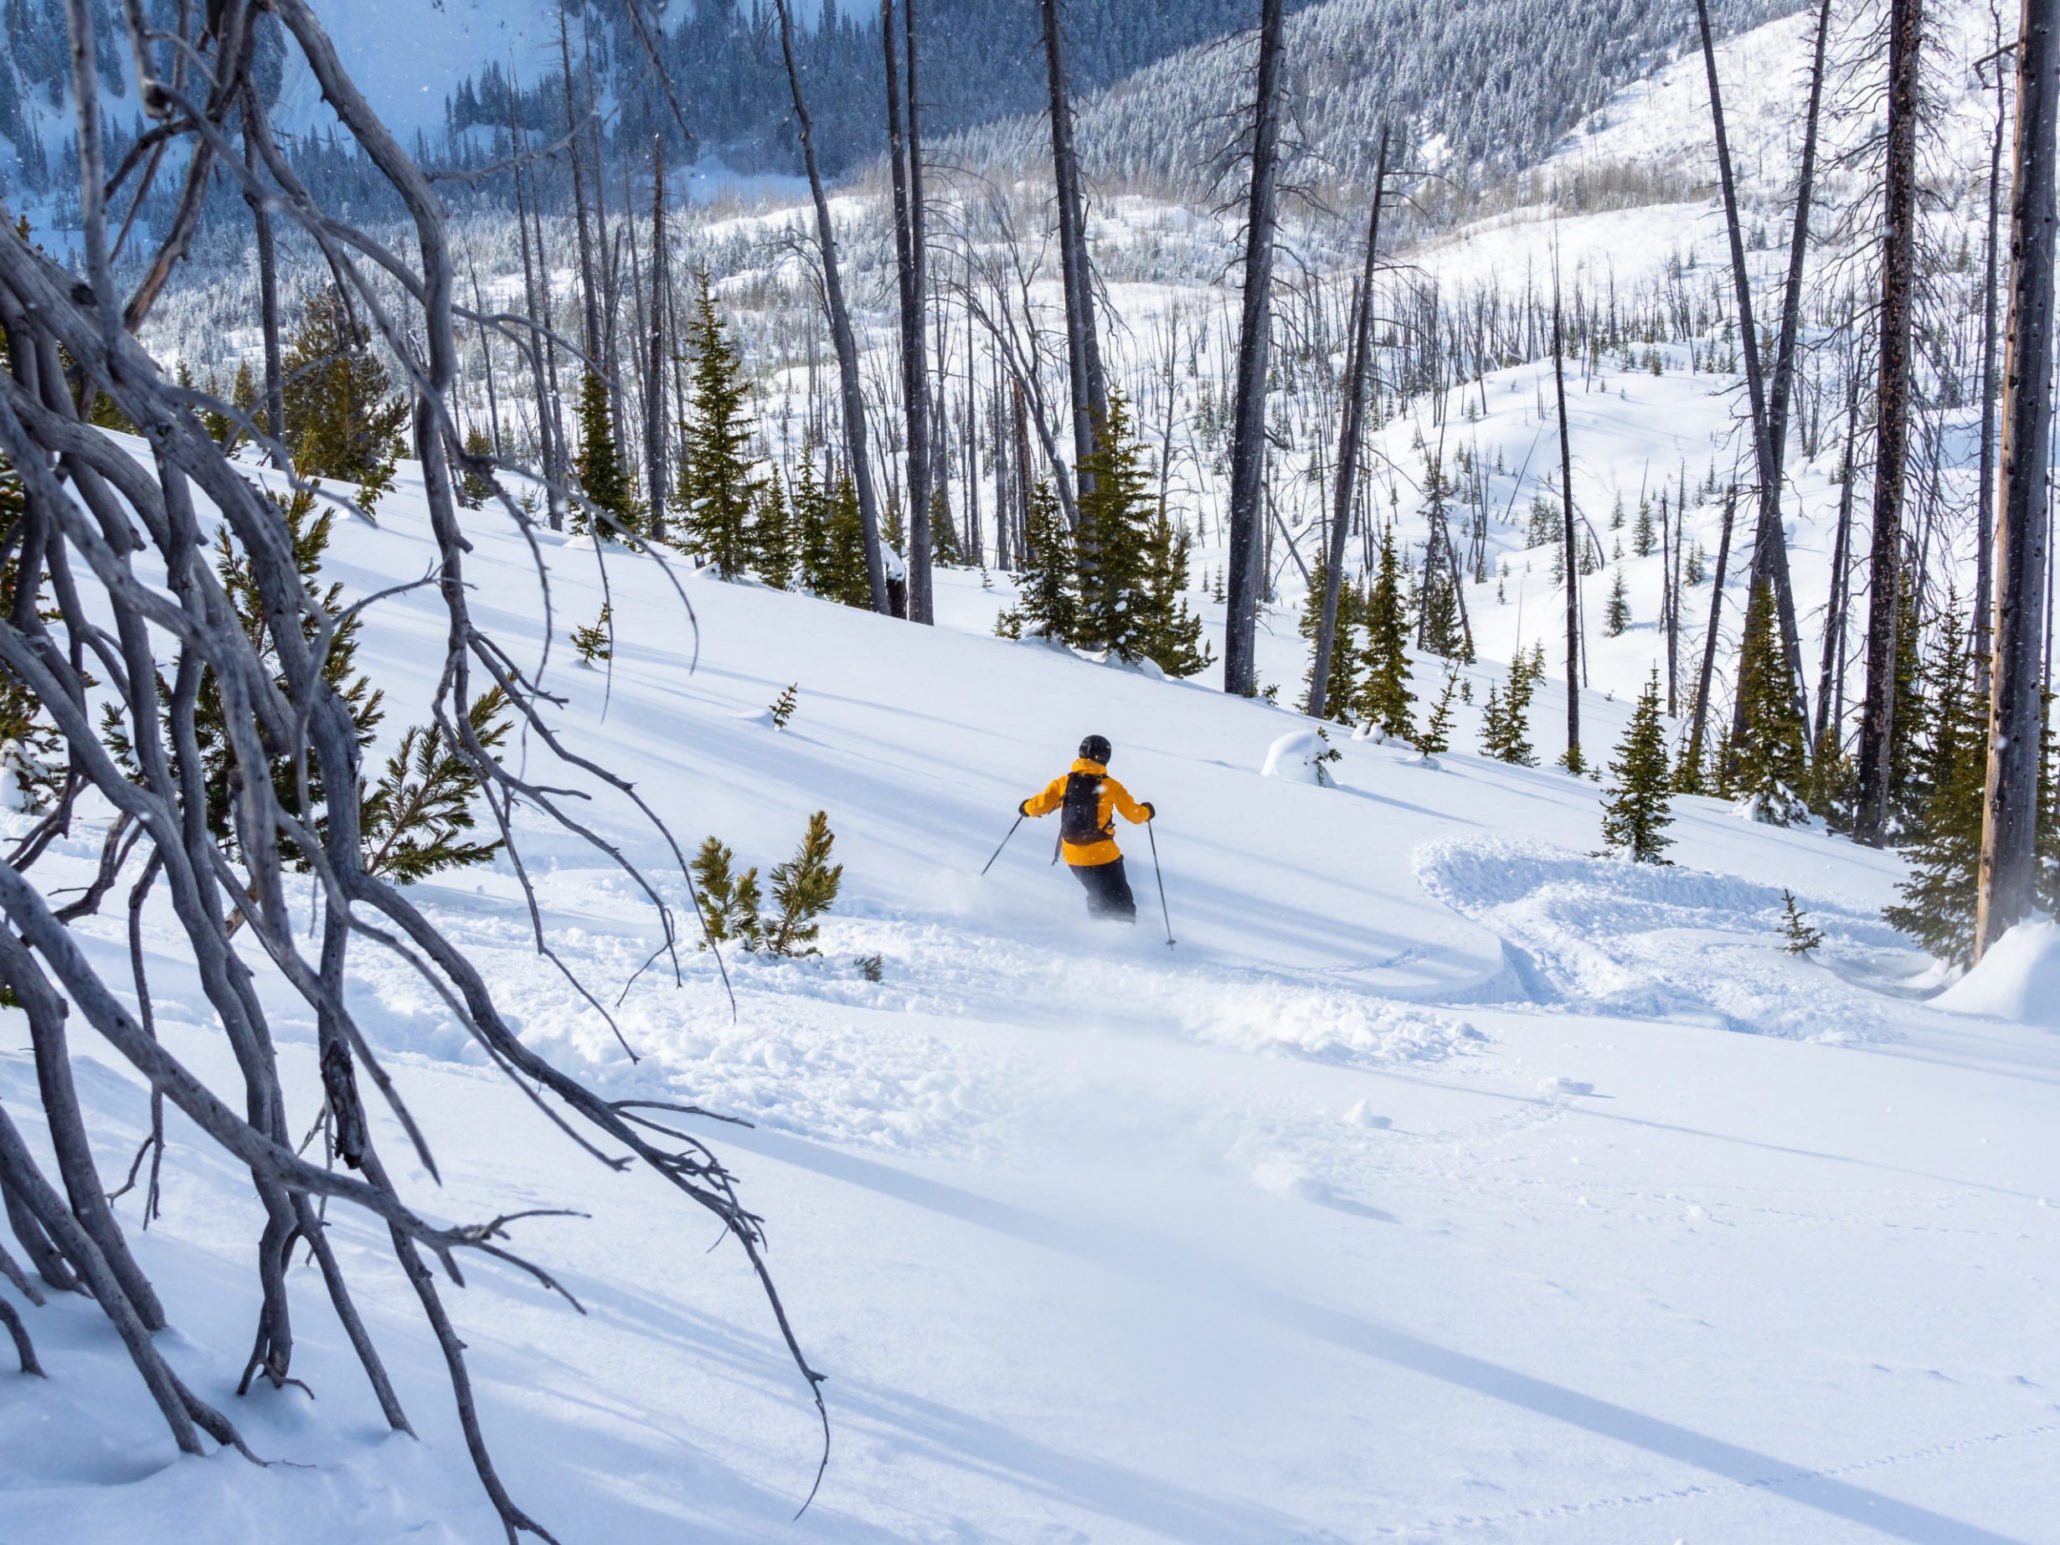 Skiier in a yellow jacket skiing down a mountainside